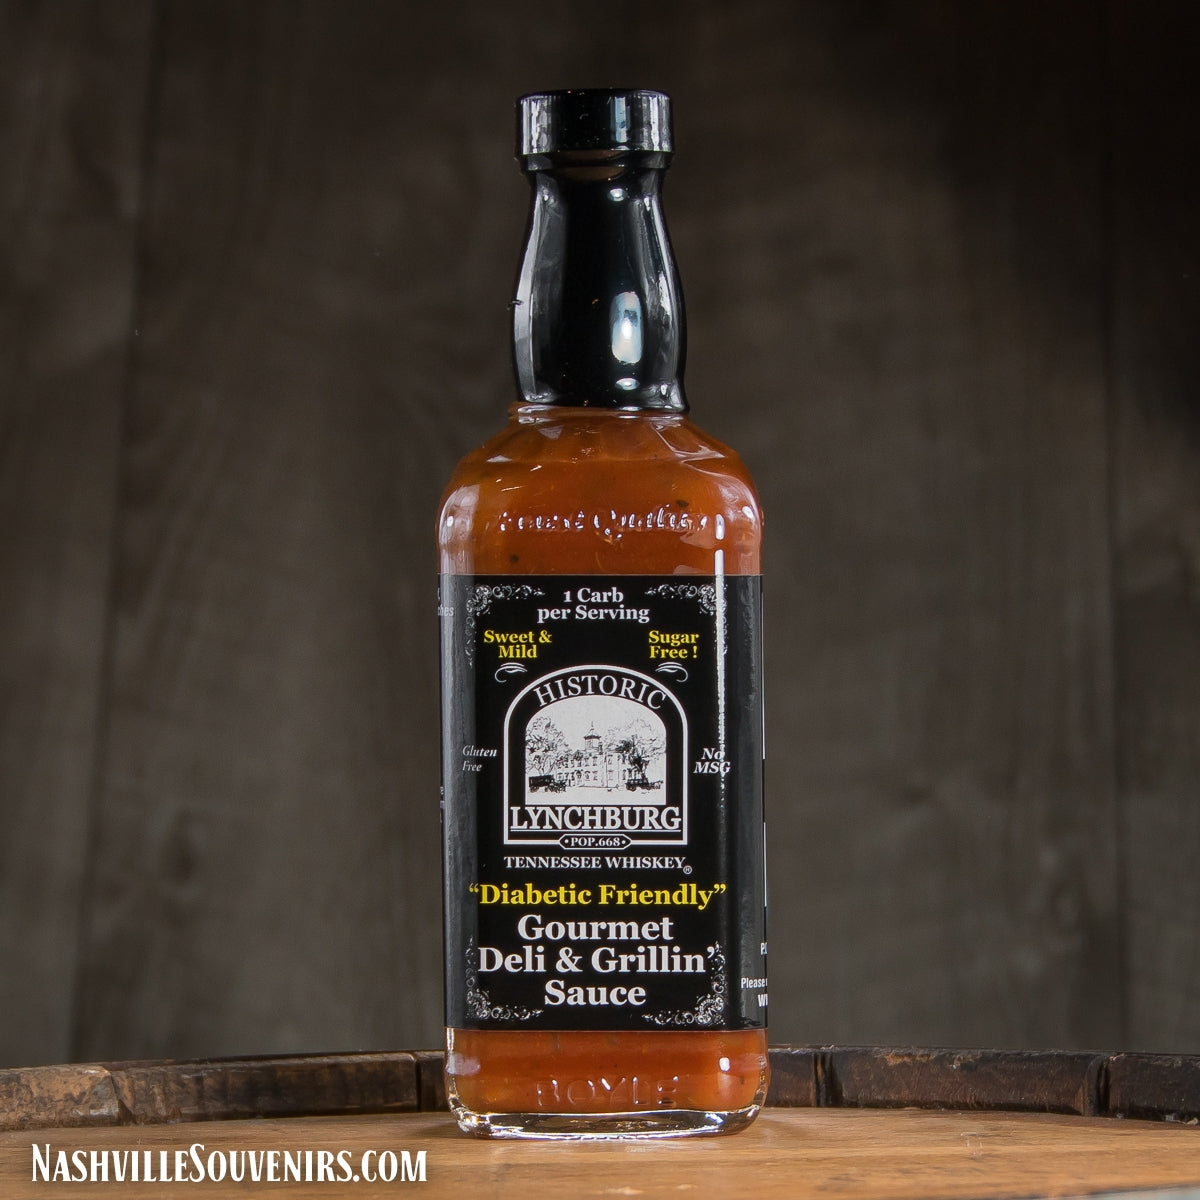 Buy Historic Lynchburg Diabetic Deli and Grillin' mild sauce and the full line of Historic Lynchburg Tennessee Whiskey products.  FREE SHIPPING on all US orders over $75!